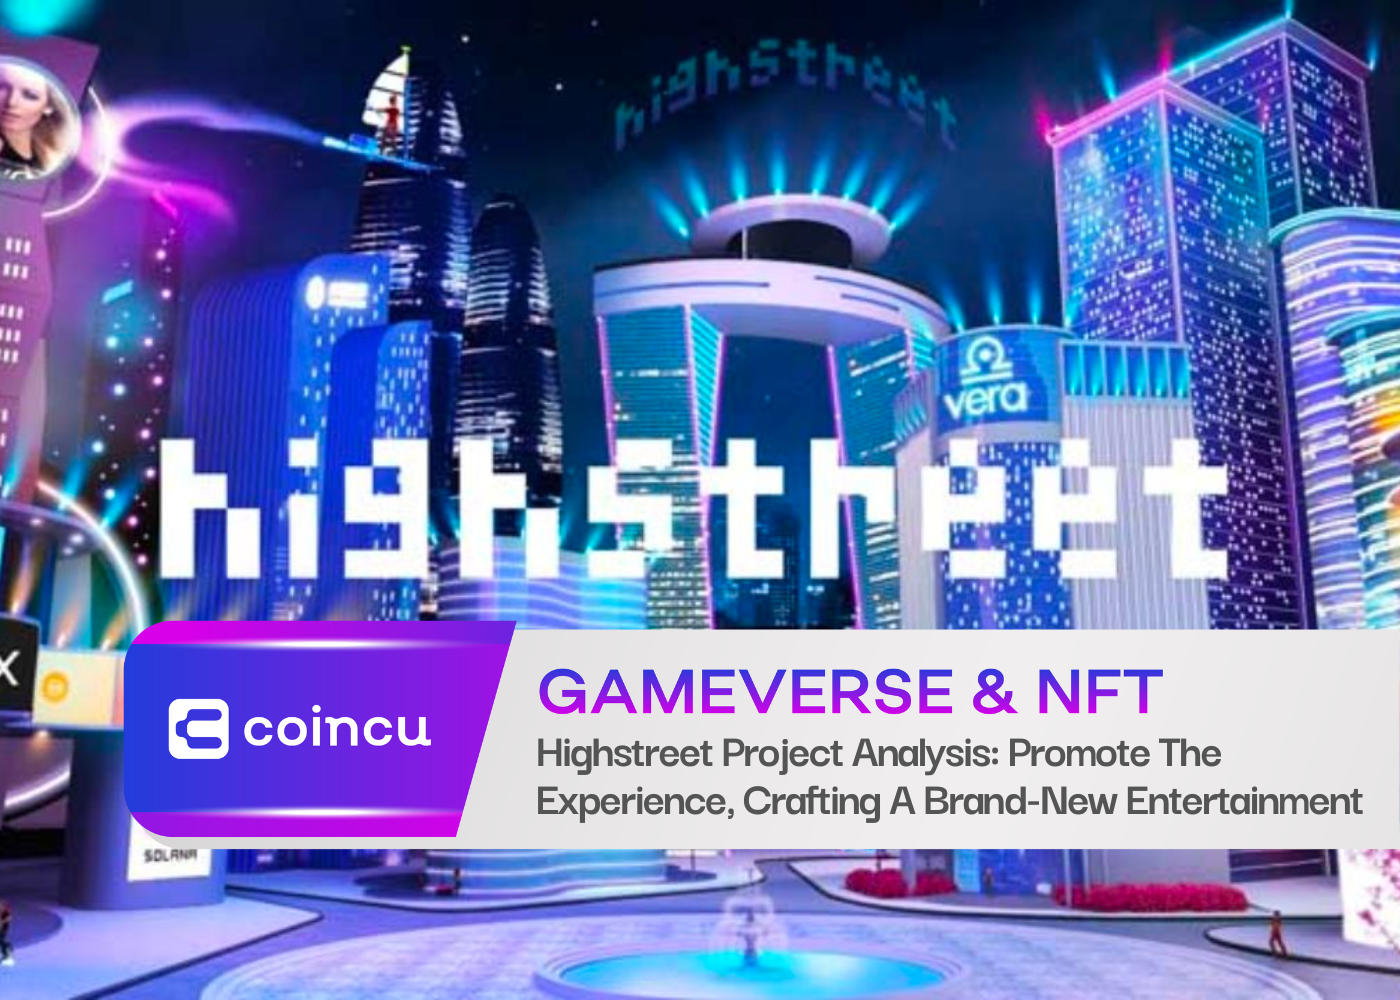 Highstreet Project Analysis: Promote The Experience, Crafting A Brand-New Entertainment